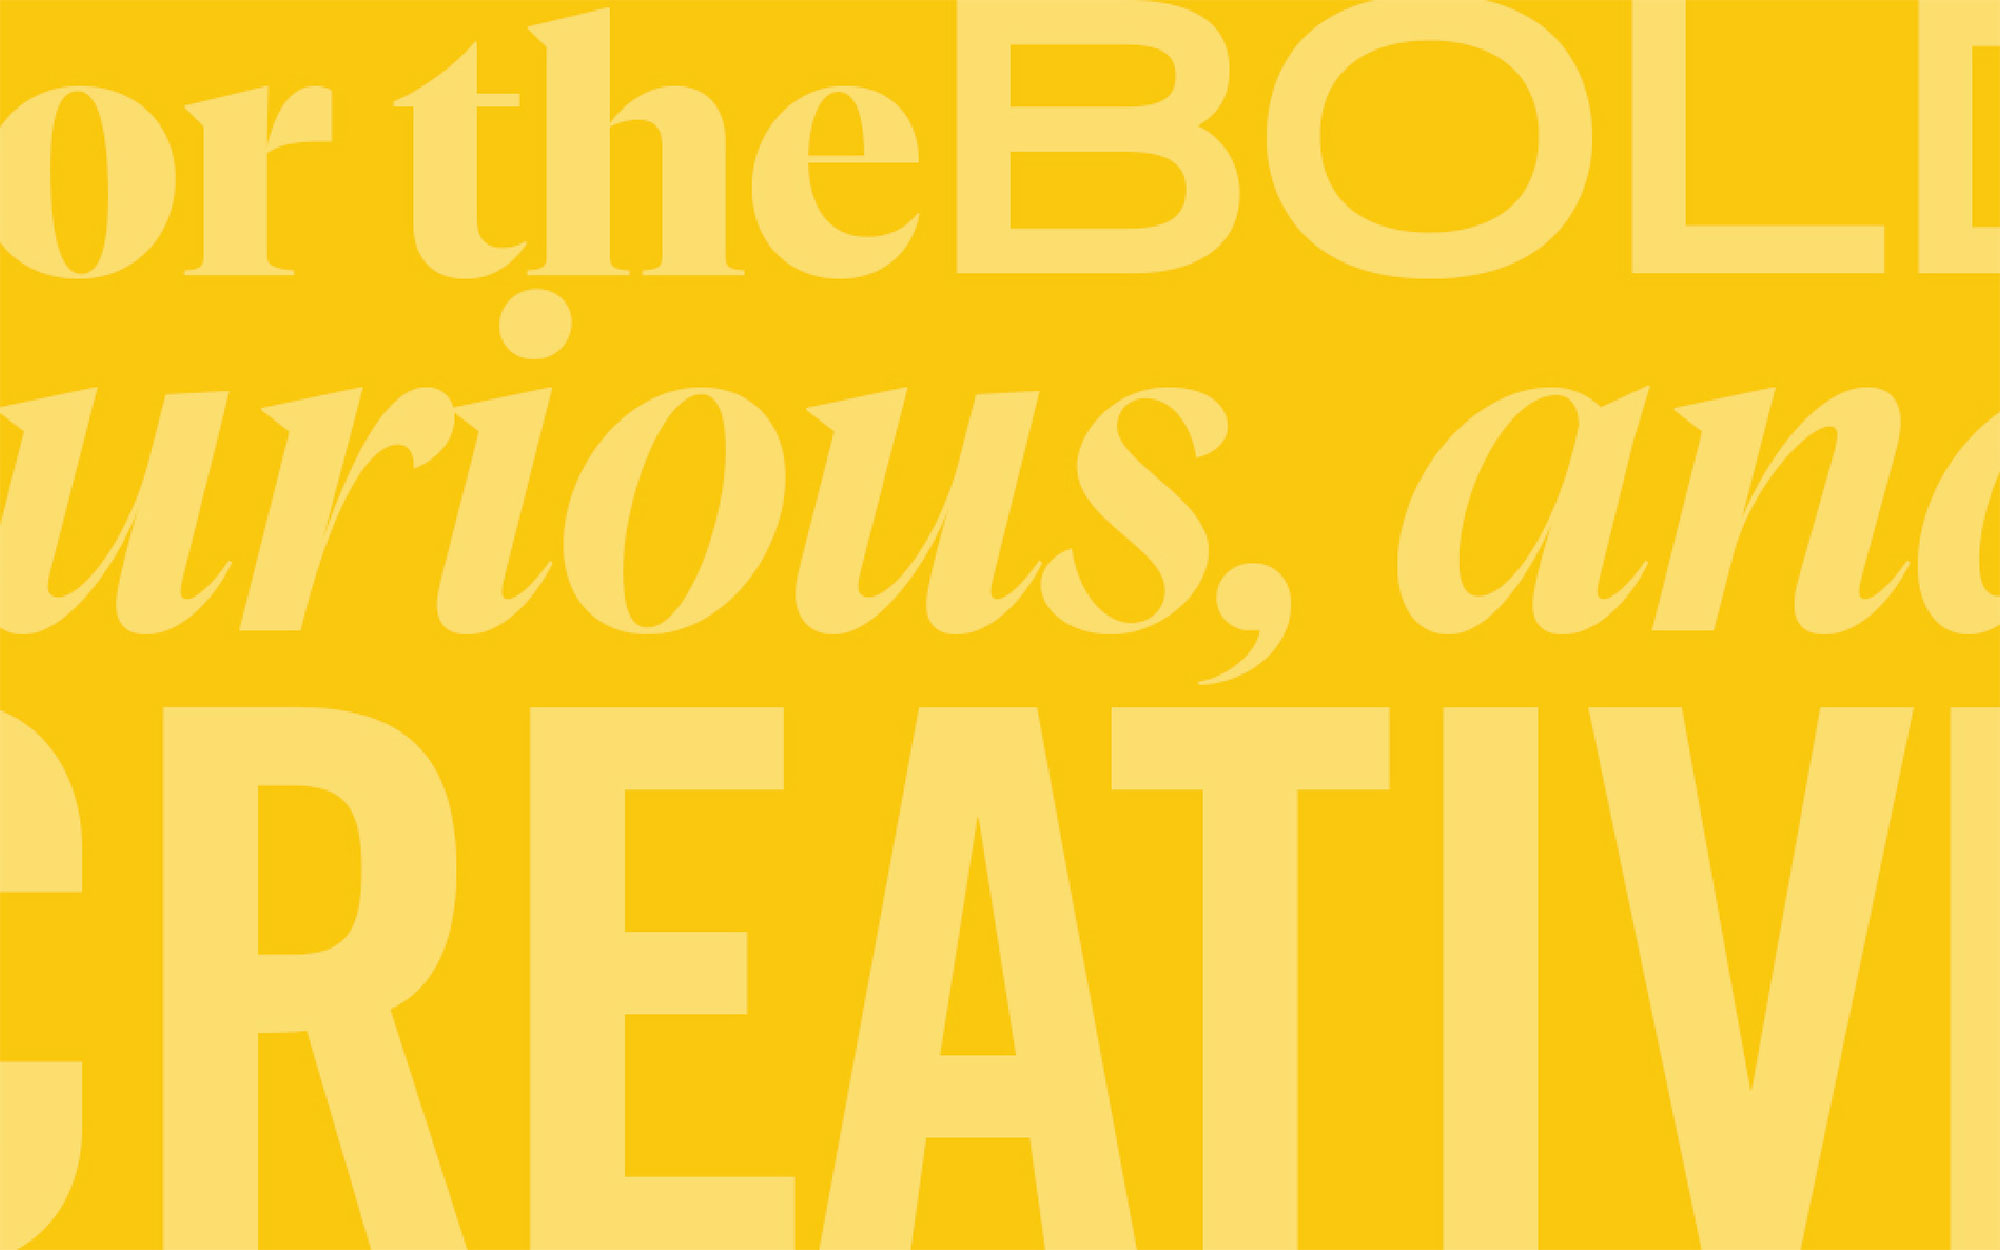 Image graphic with the words - bold, curious, creative